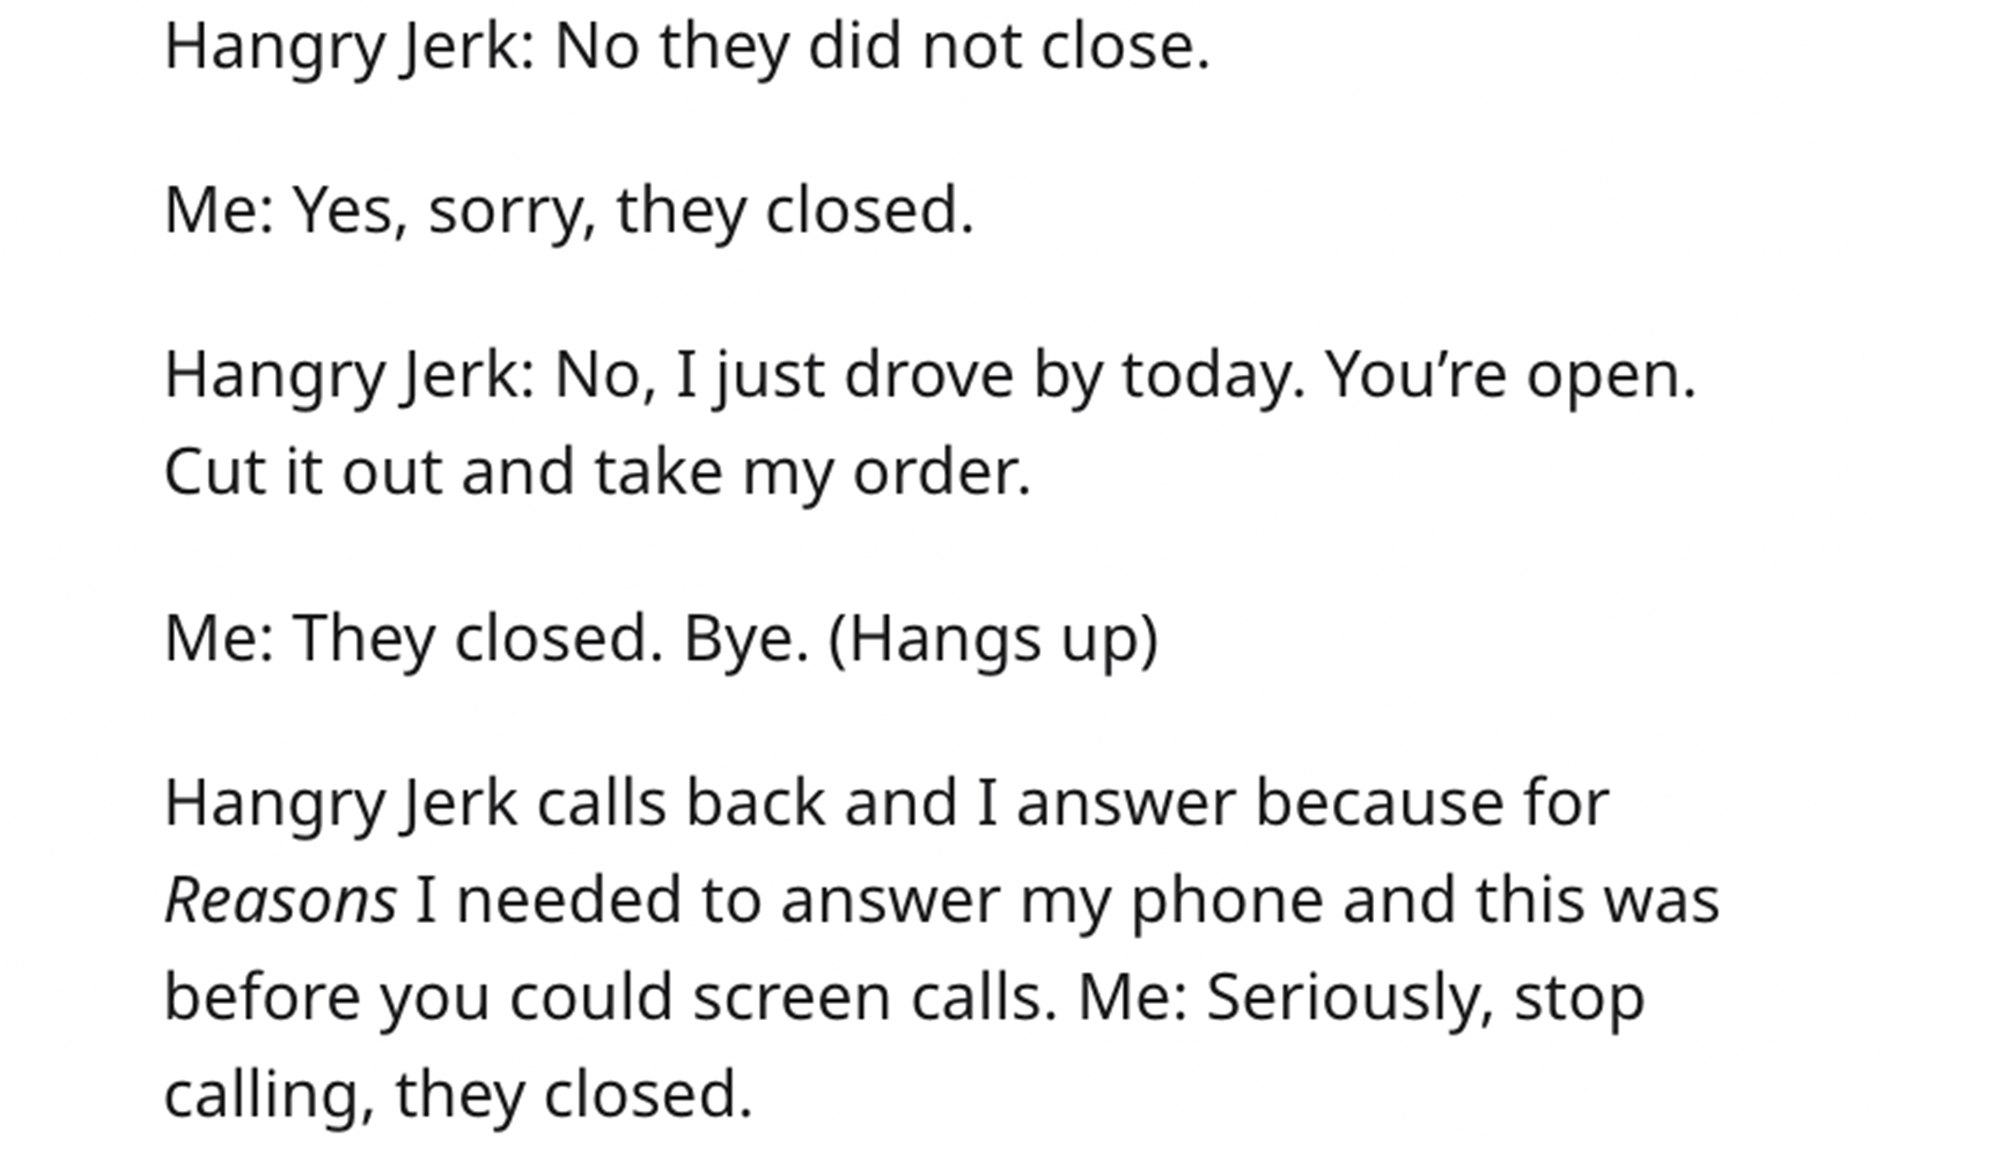 Entitled Chinese Restaurant Heckler - Valence electron - Hangry Jerk No they did not close. Me Yes, sorry, they closed. Hangry Jerk No, I just drove by today. You're open. Cut it out and take my order. Me They closed. Bye. Hangs up Hangry Jerk calls back 